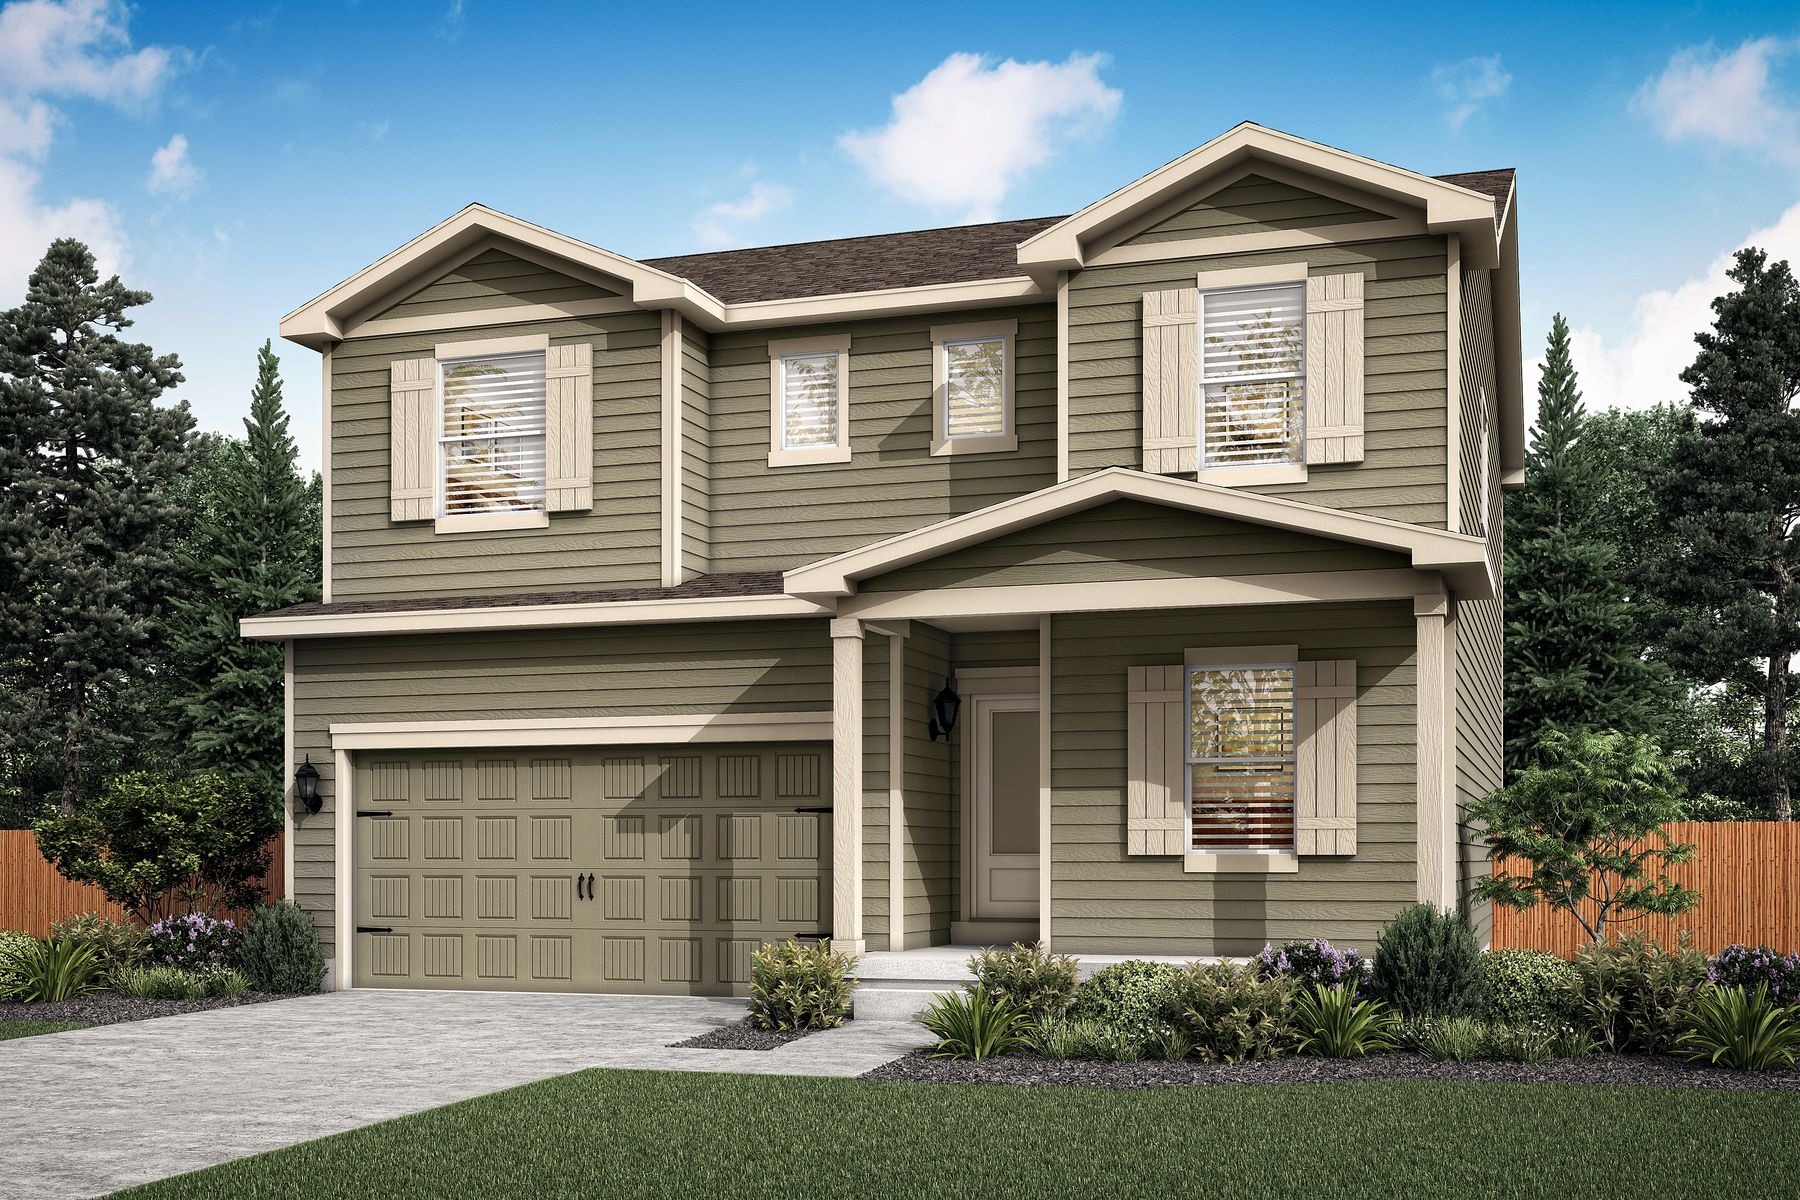 Rendering of the Columbia II at Cottonwood Greens.:LGI Homes at Cottonwood Greens